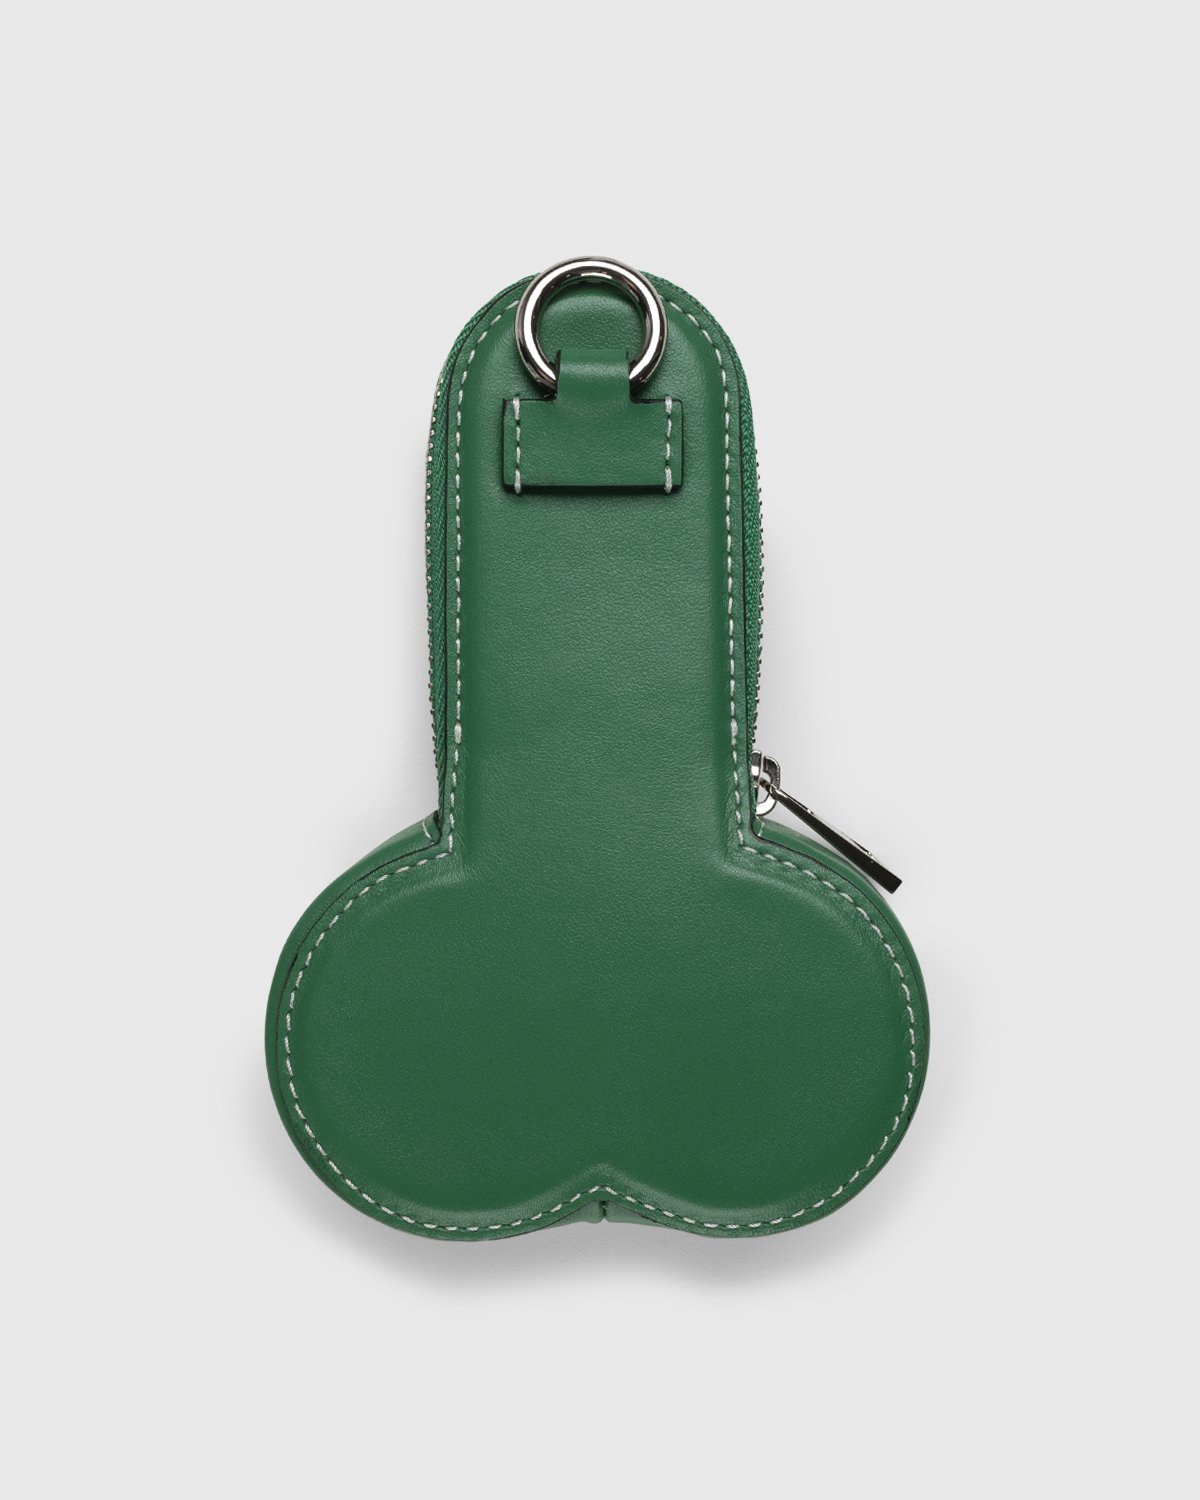 J.W. Anderson - Penis Coin Purse Green - Accessories - Green - Image 3